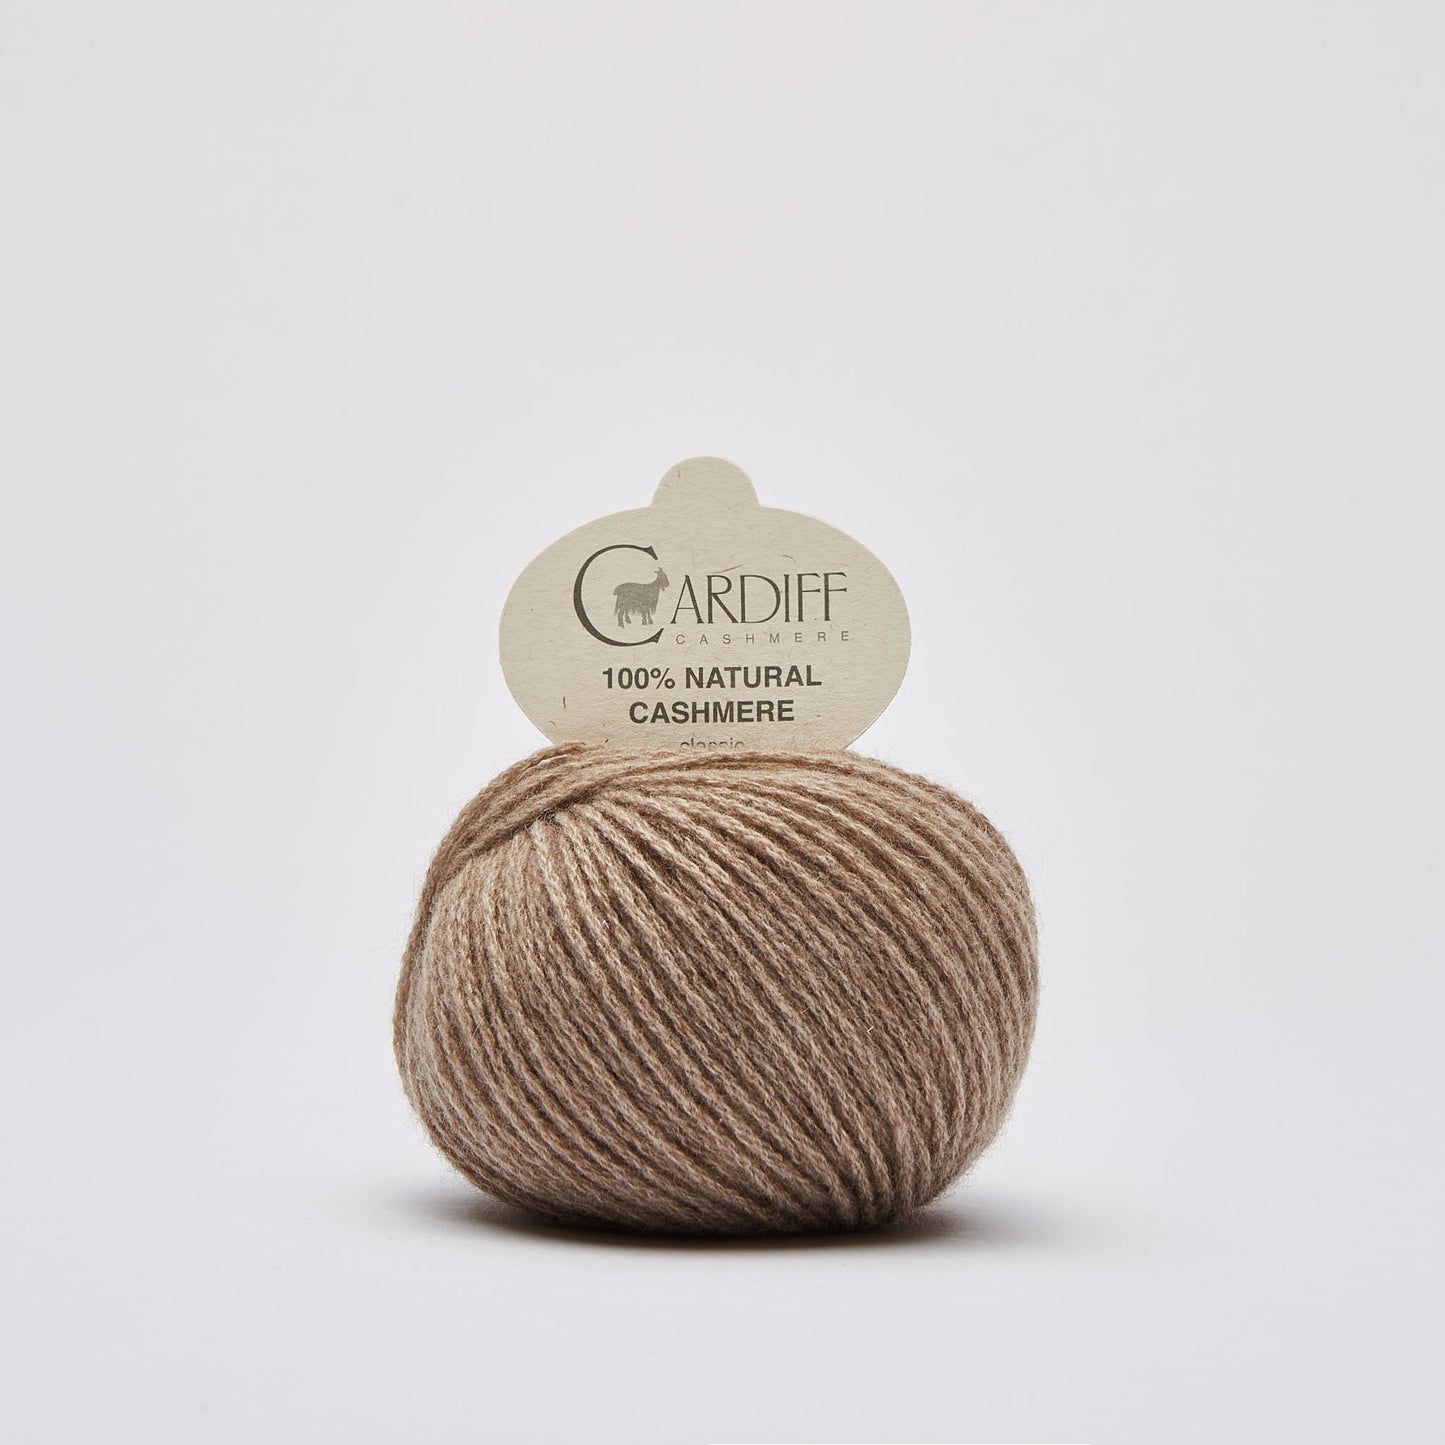 Cardiff CLASSIC gentle yarn, 511, BROWN, comp: 100% Cashmere